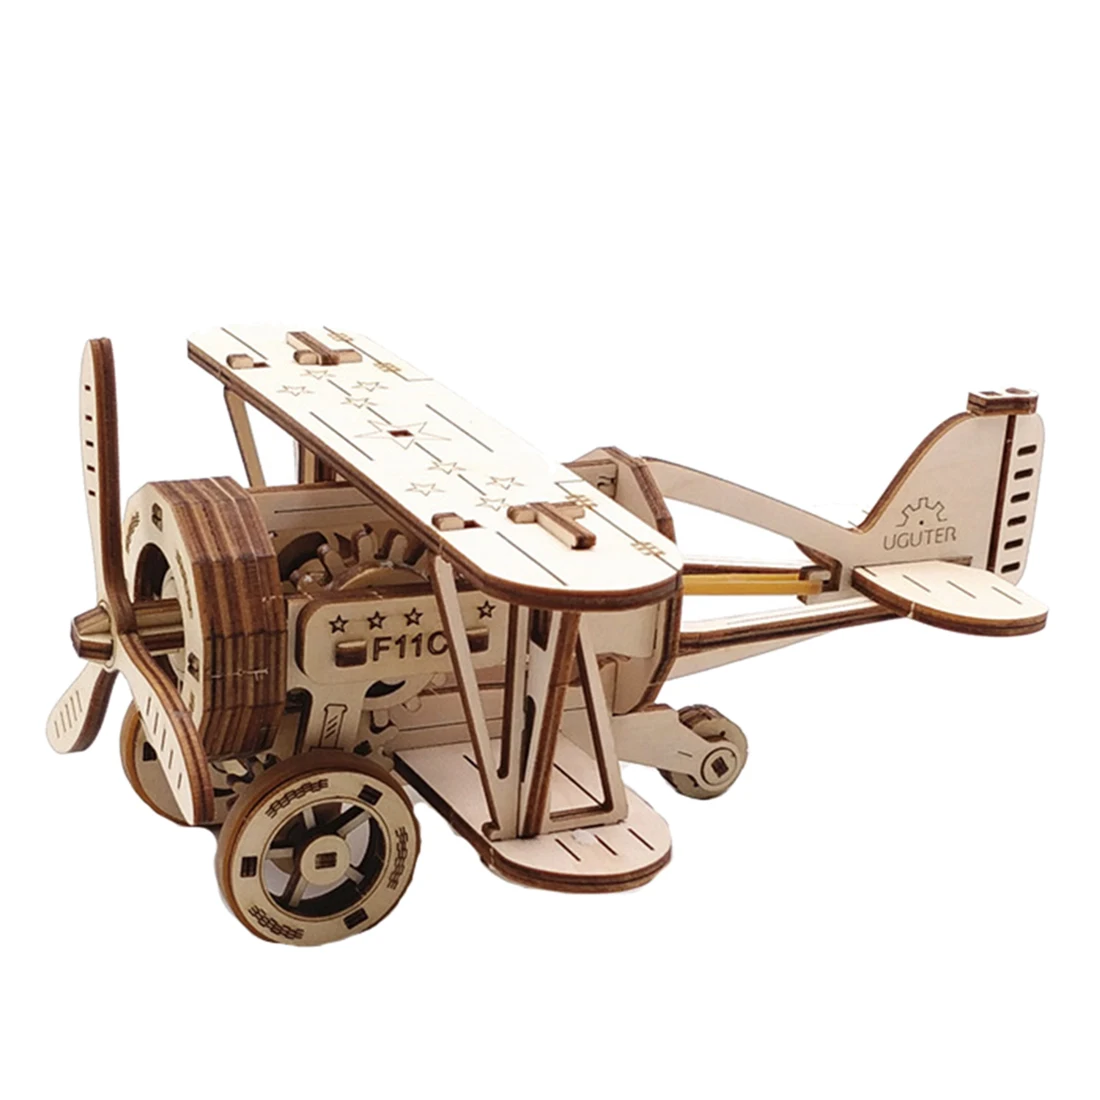 

3D Wooden Biplane DIY Assembly Mechanical Transmission Airplane Woodcraft Toy Christmas Gift Kids Adult Model Building Kit